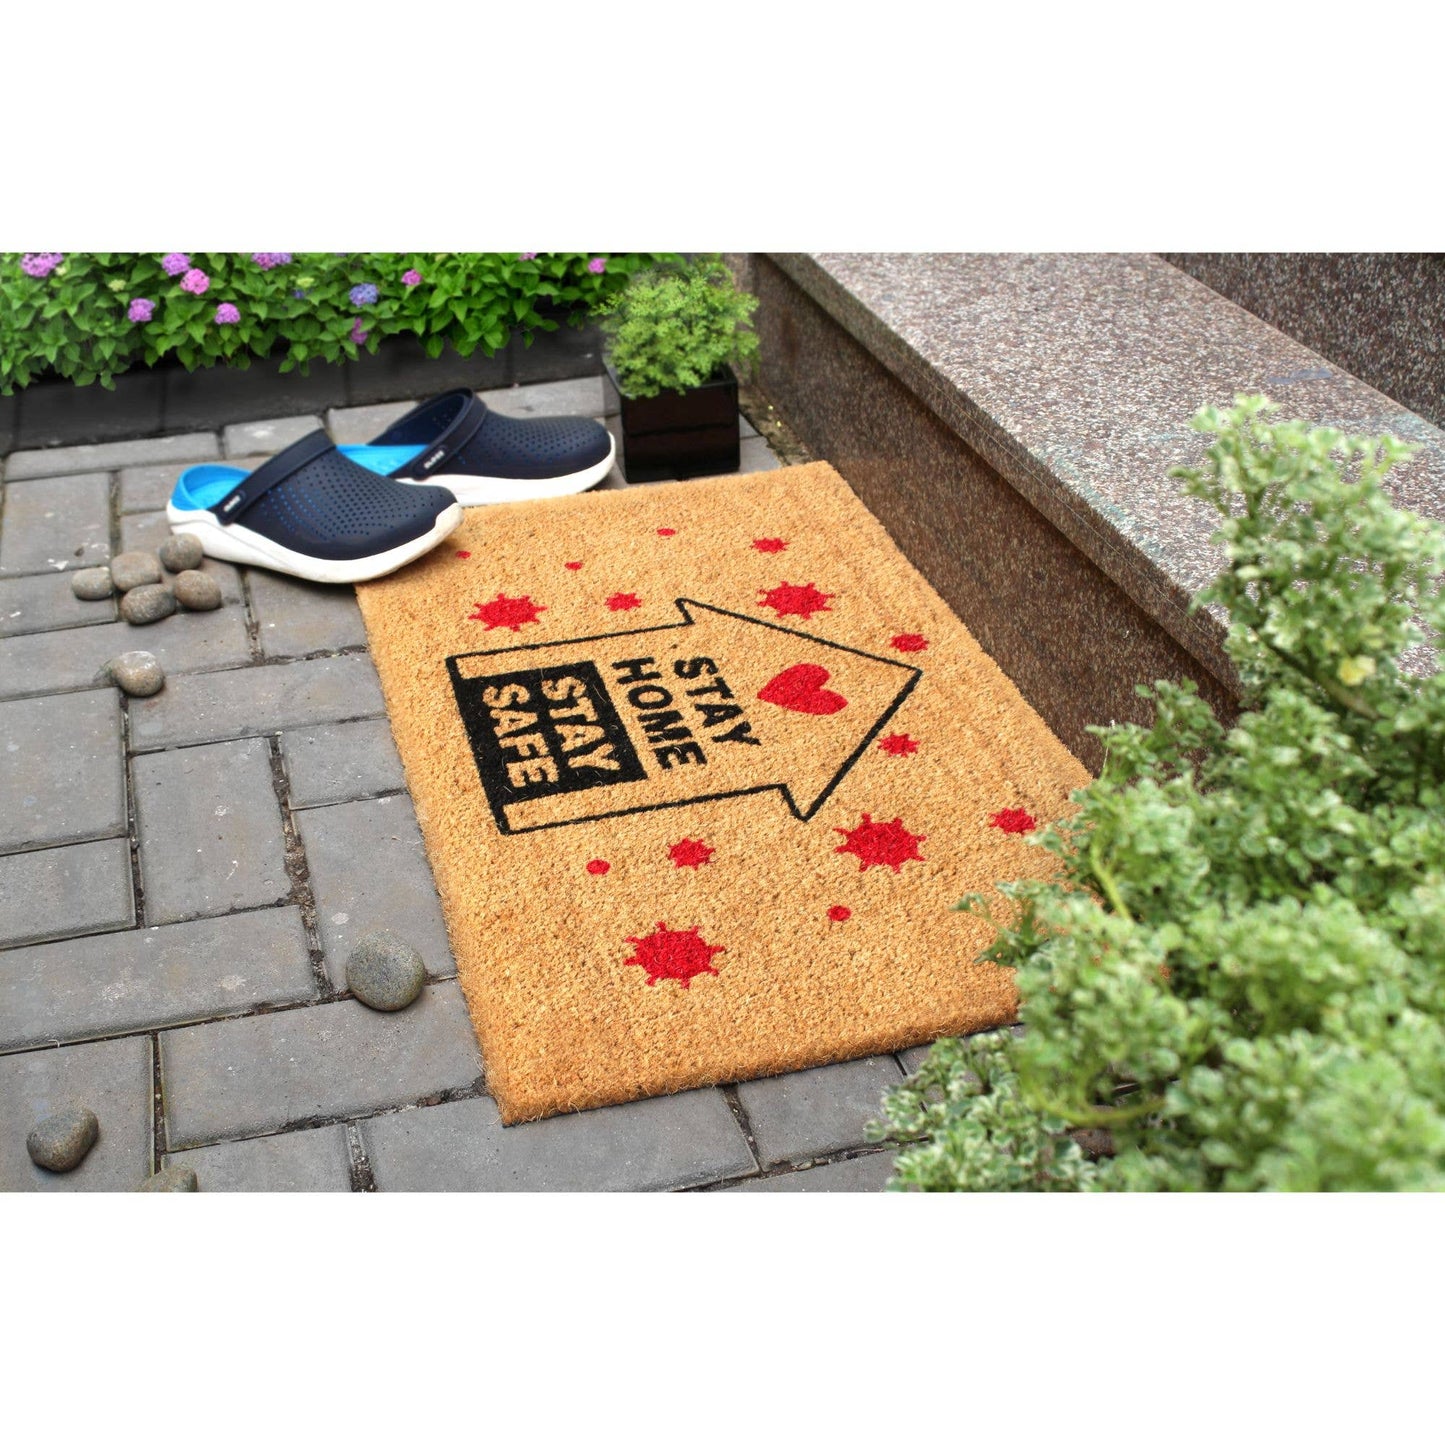 RugSmith Multi Tufted Stay Home, Stay Safe Doormat, 18"x30"Heart